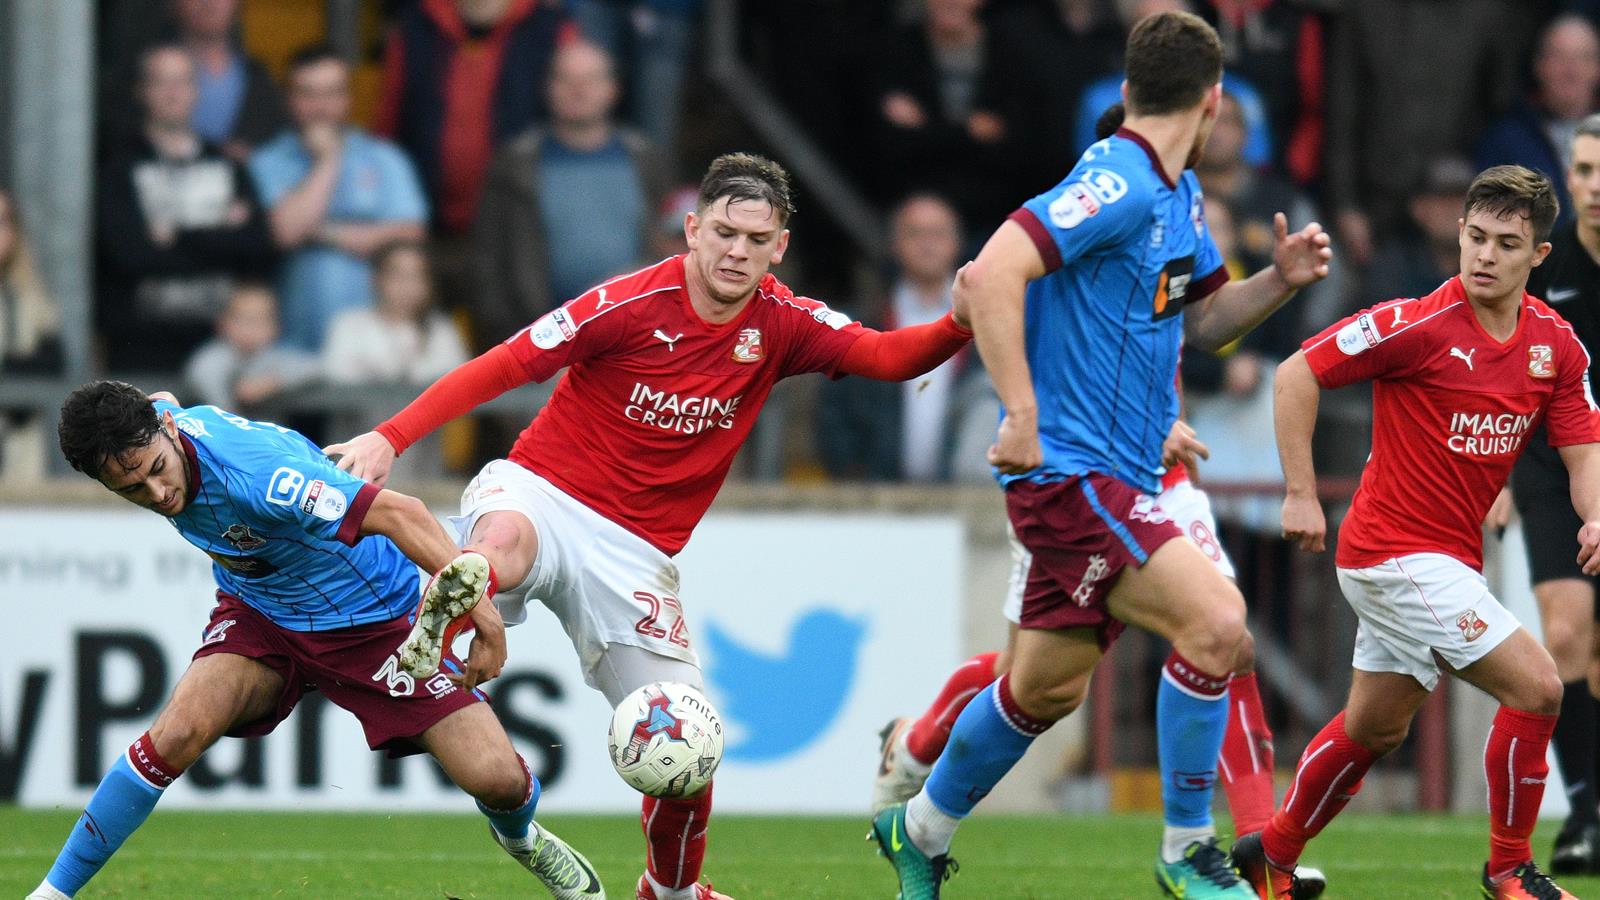 FA CUP MATCH PREVIEW: EASTLEIGH V SWINDON TOWN - News - Swindon Town1600 x 900